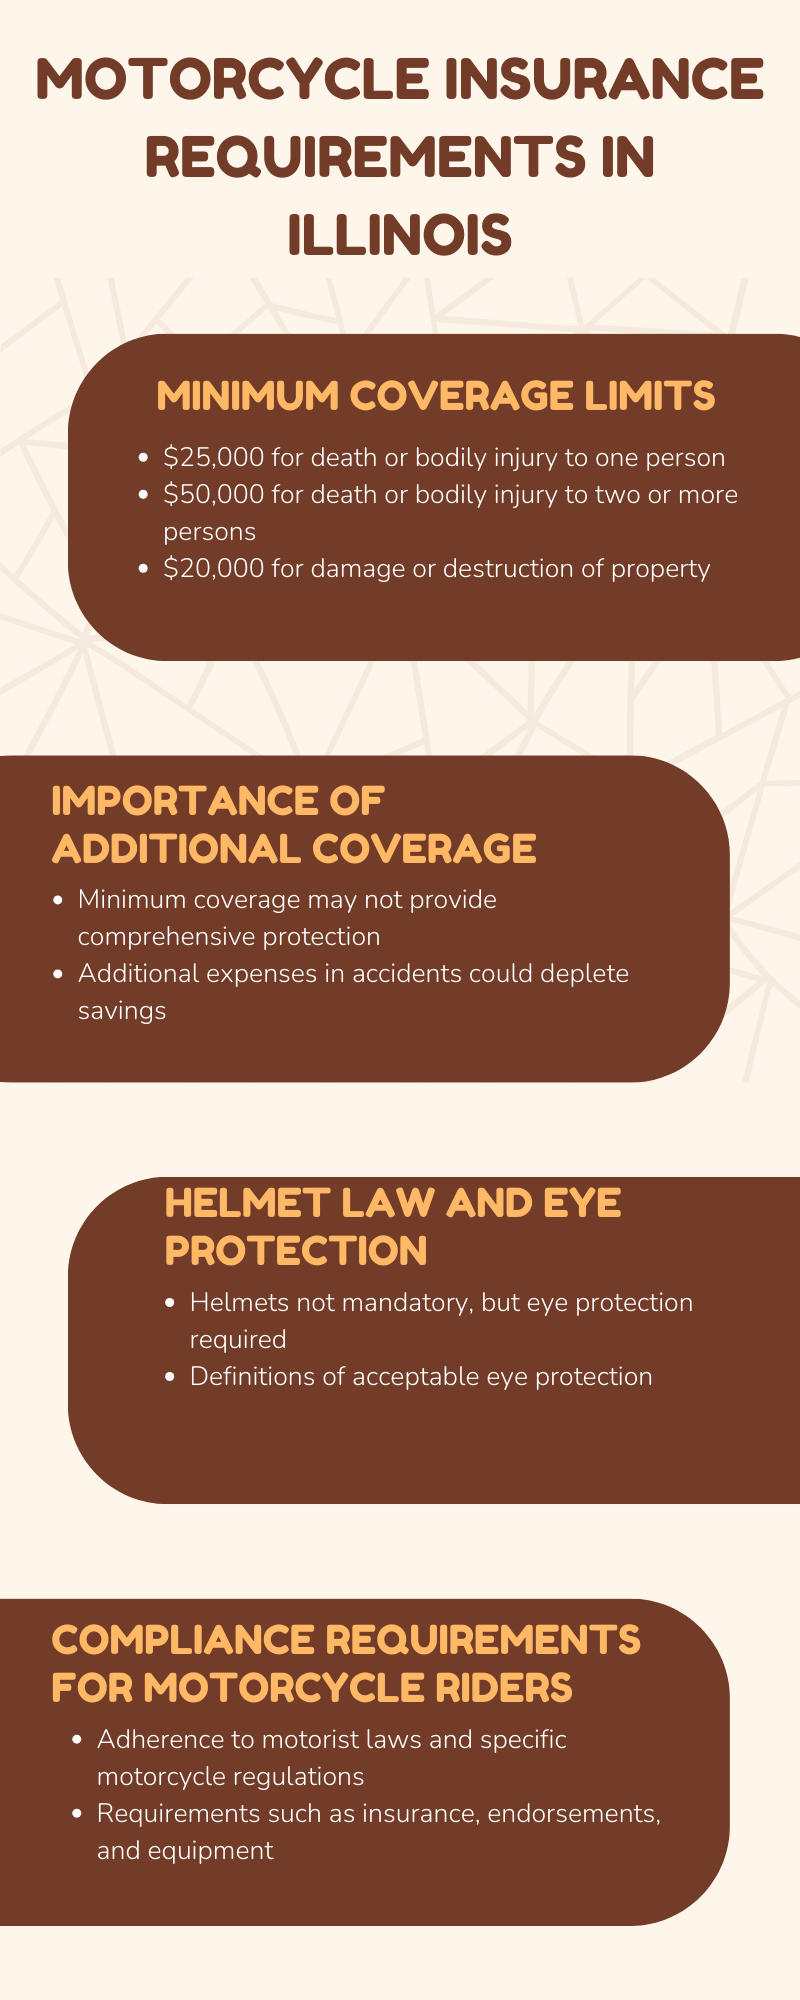 An infographic illustration of Motorcycle Insurance Requirements in Illinois